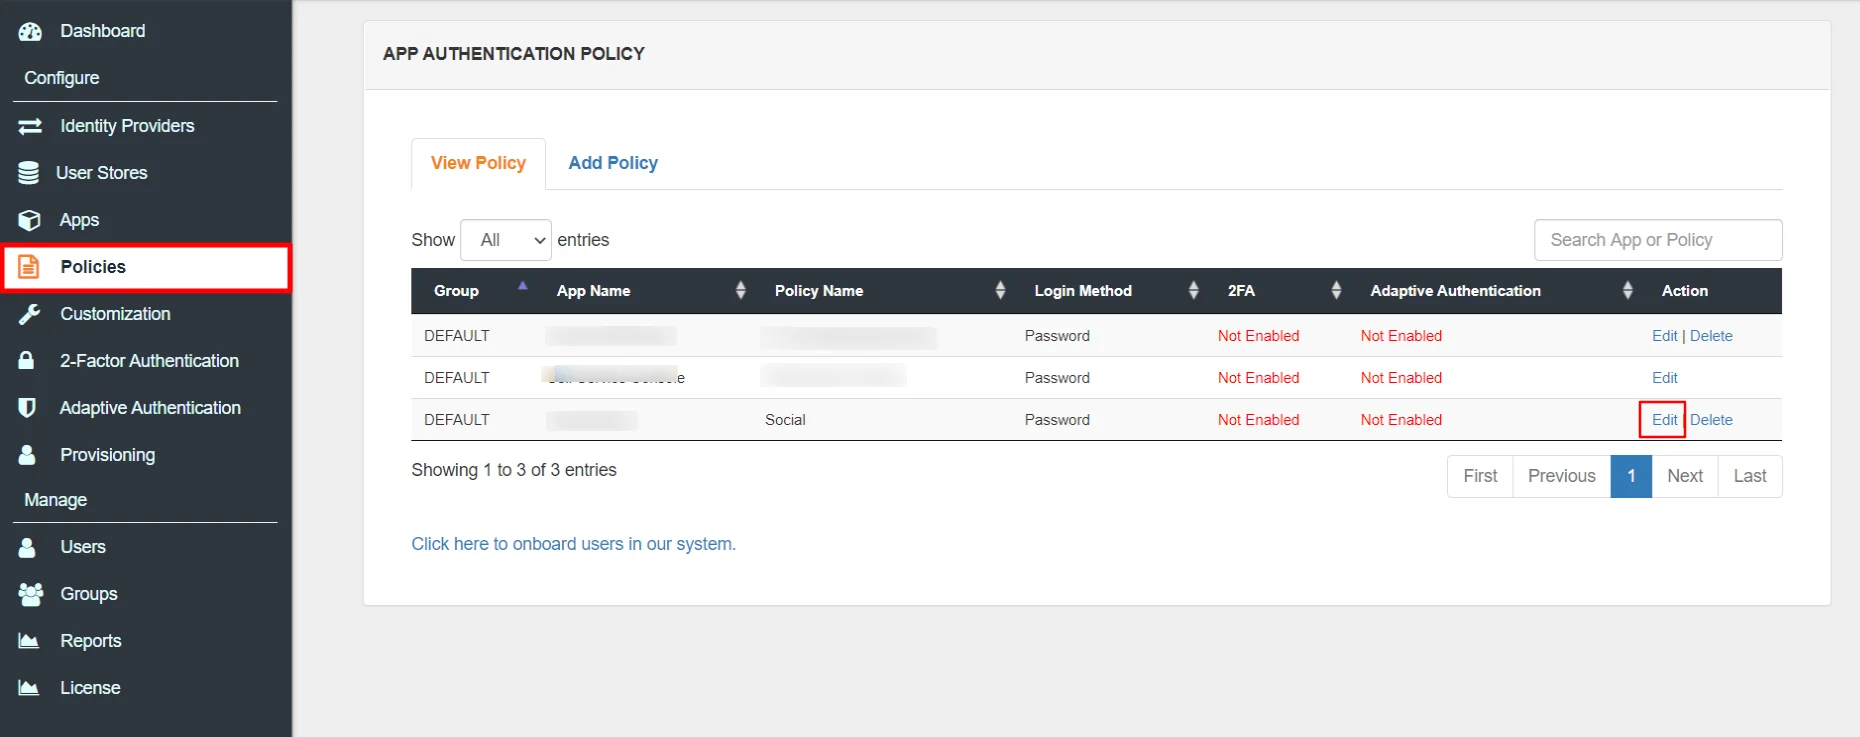 Oracle E-Business  2FA/MFA Restrict Access adaptive authnetication policy